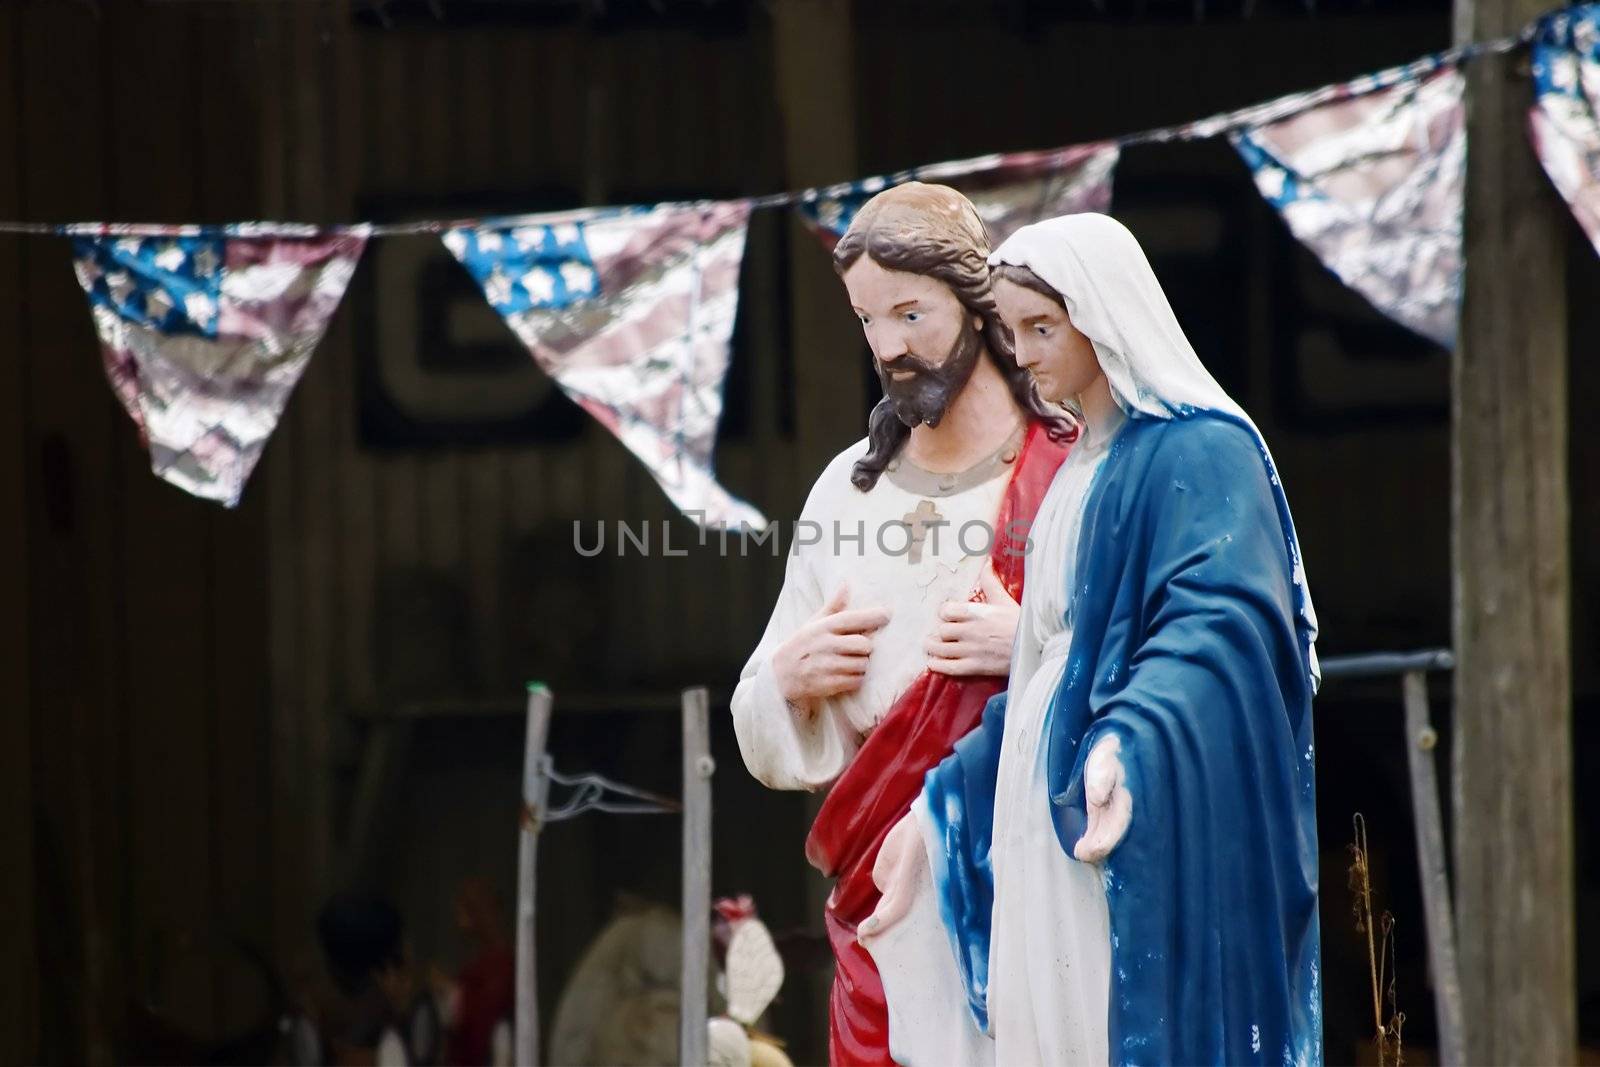 Kitsch statues of Jesus and Mary by Creatista